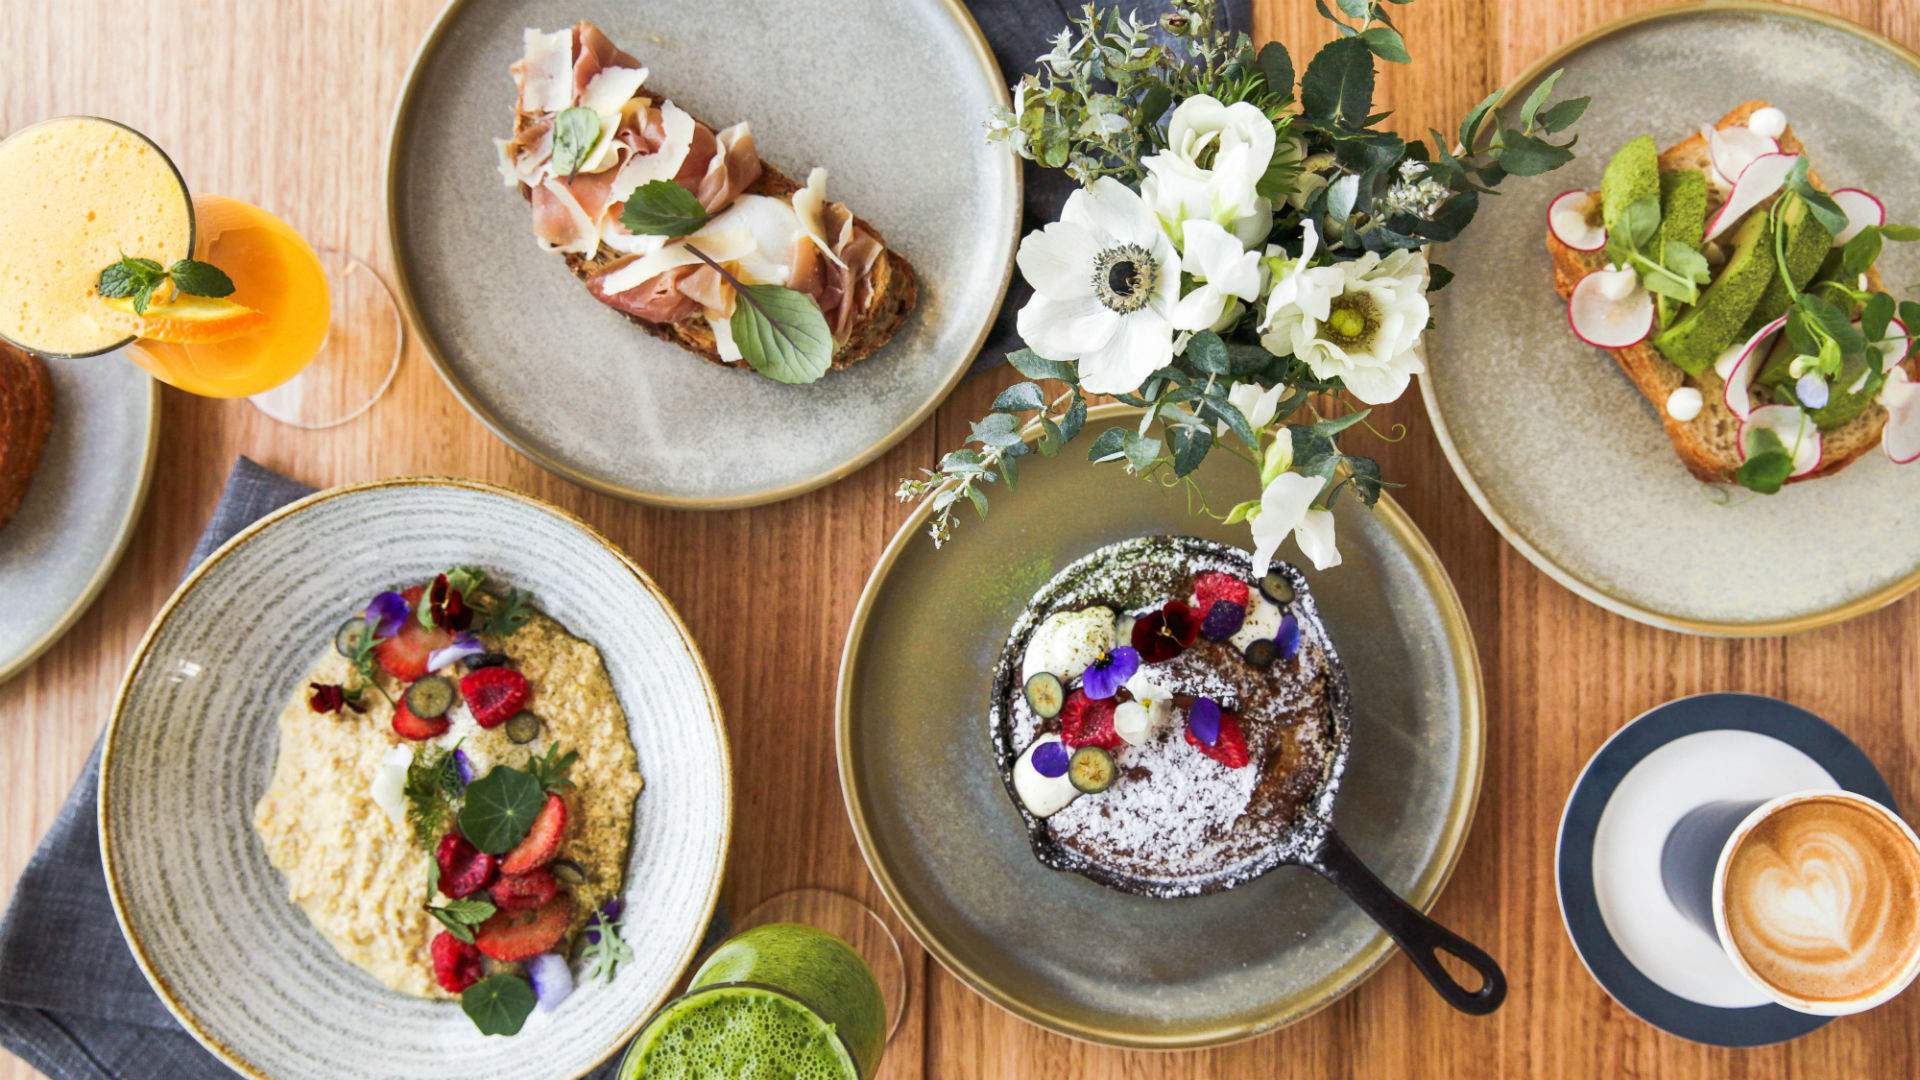 Pasture Is the Lower North Shore's New Beachside Cafe Slinging Homemade Honeyed Crumpets and Cocktails